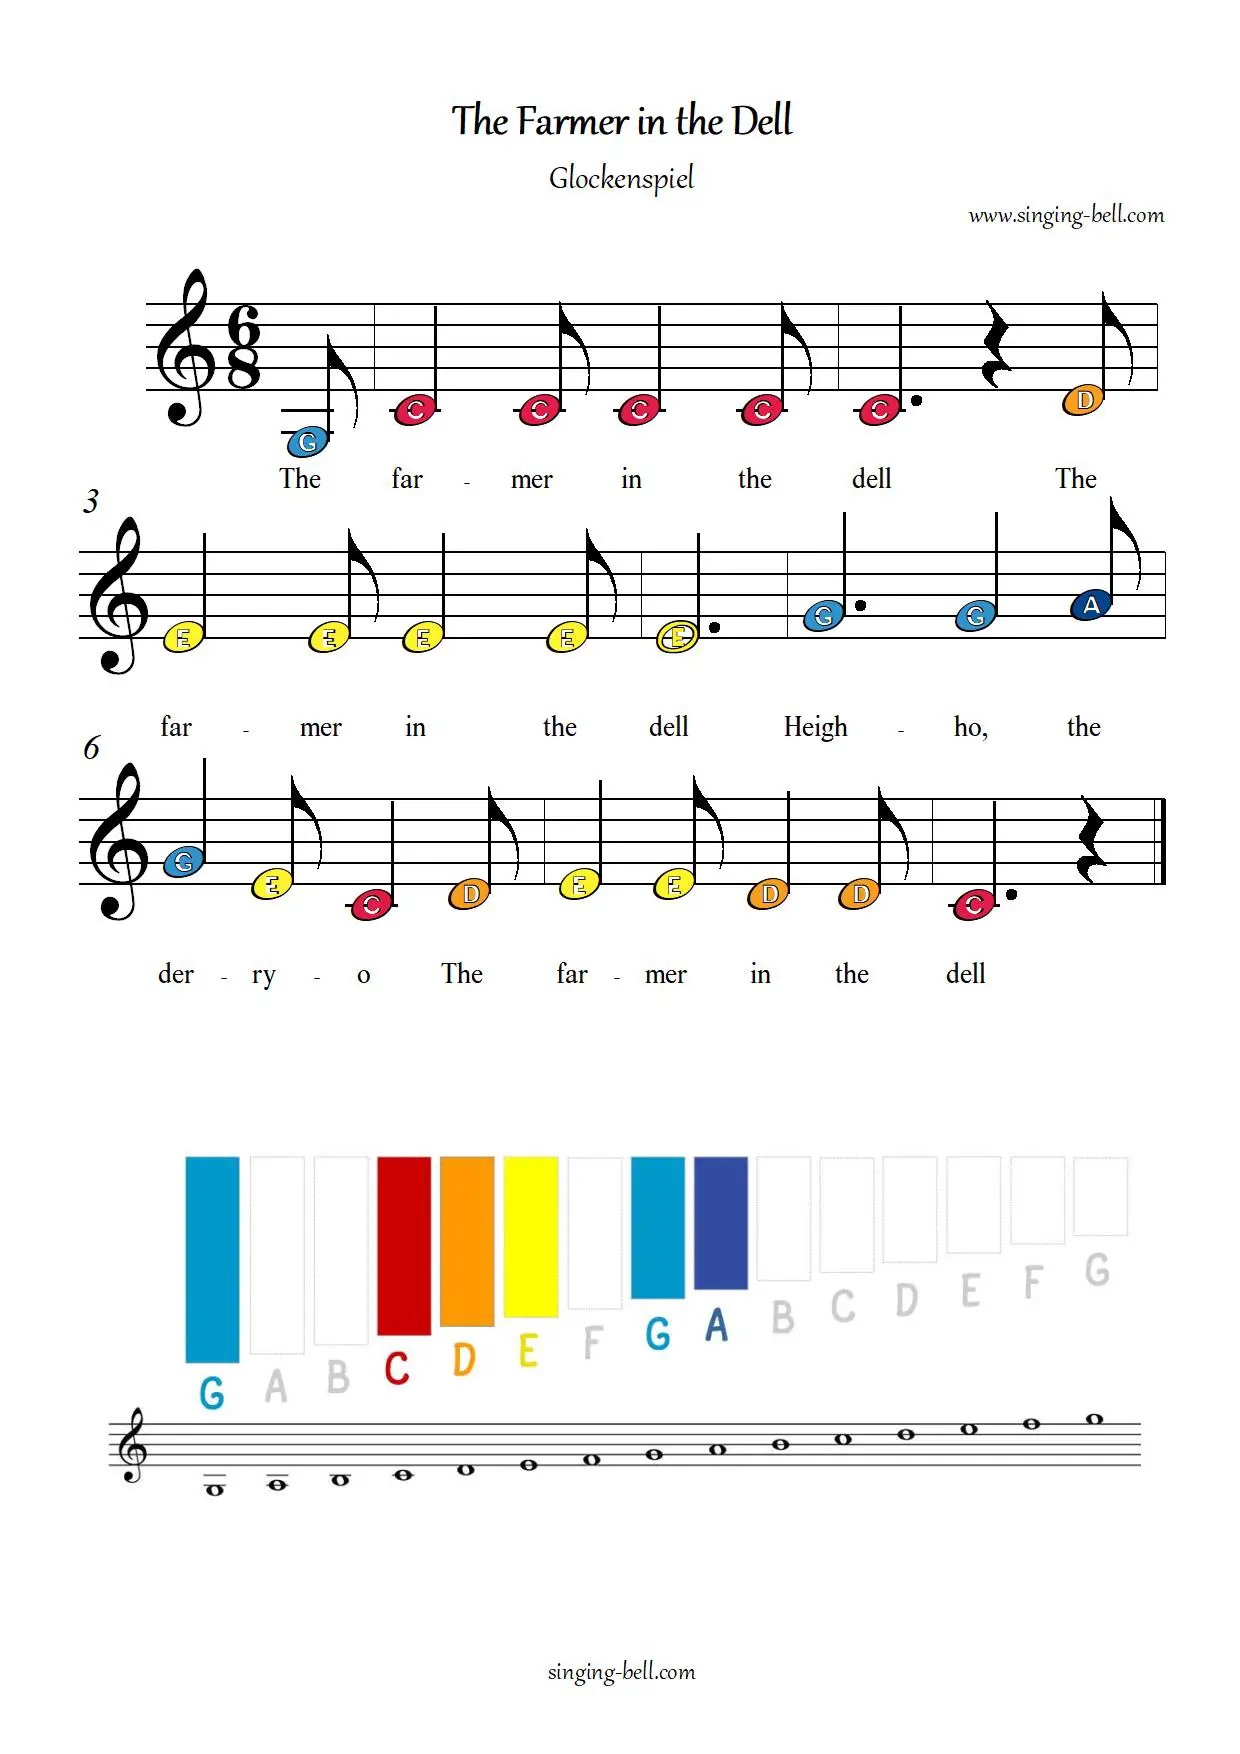 The farmer in the dell free xylophone glockenspiel sheet music color notes chart pdf